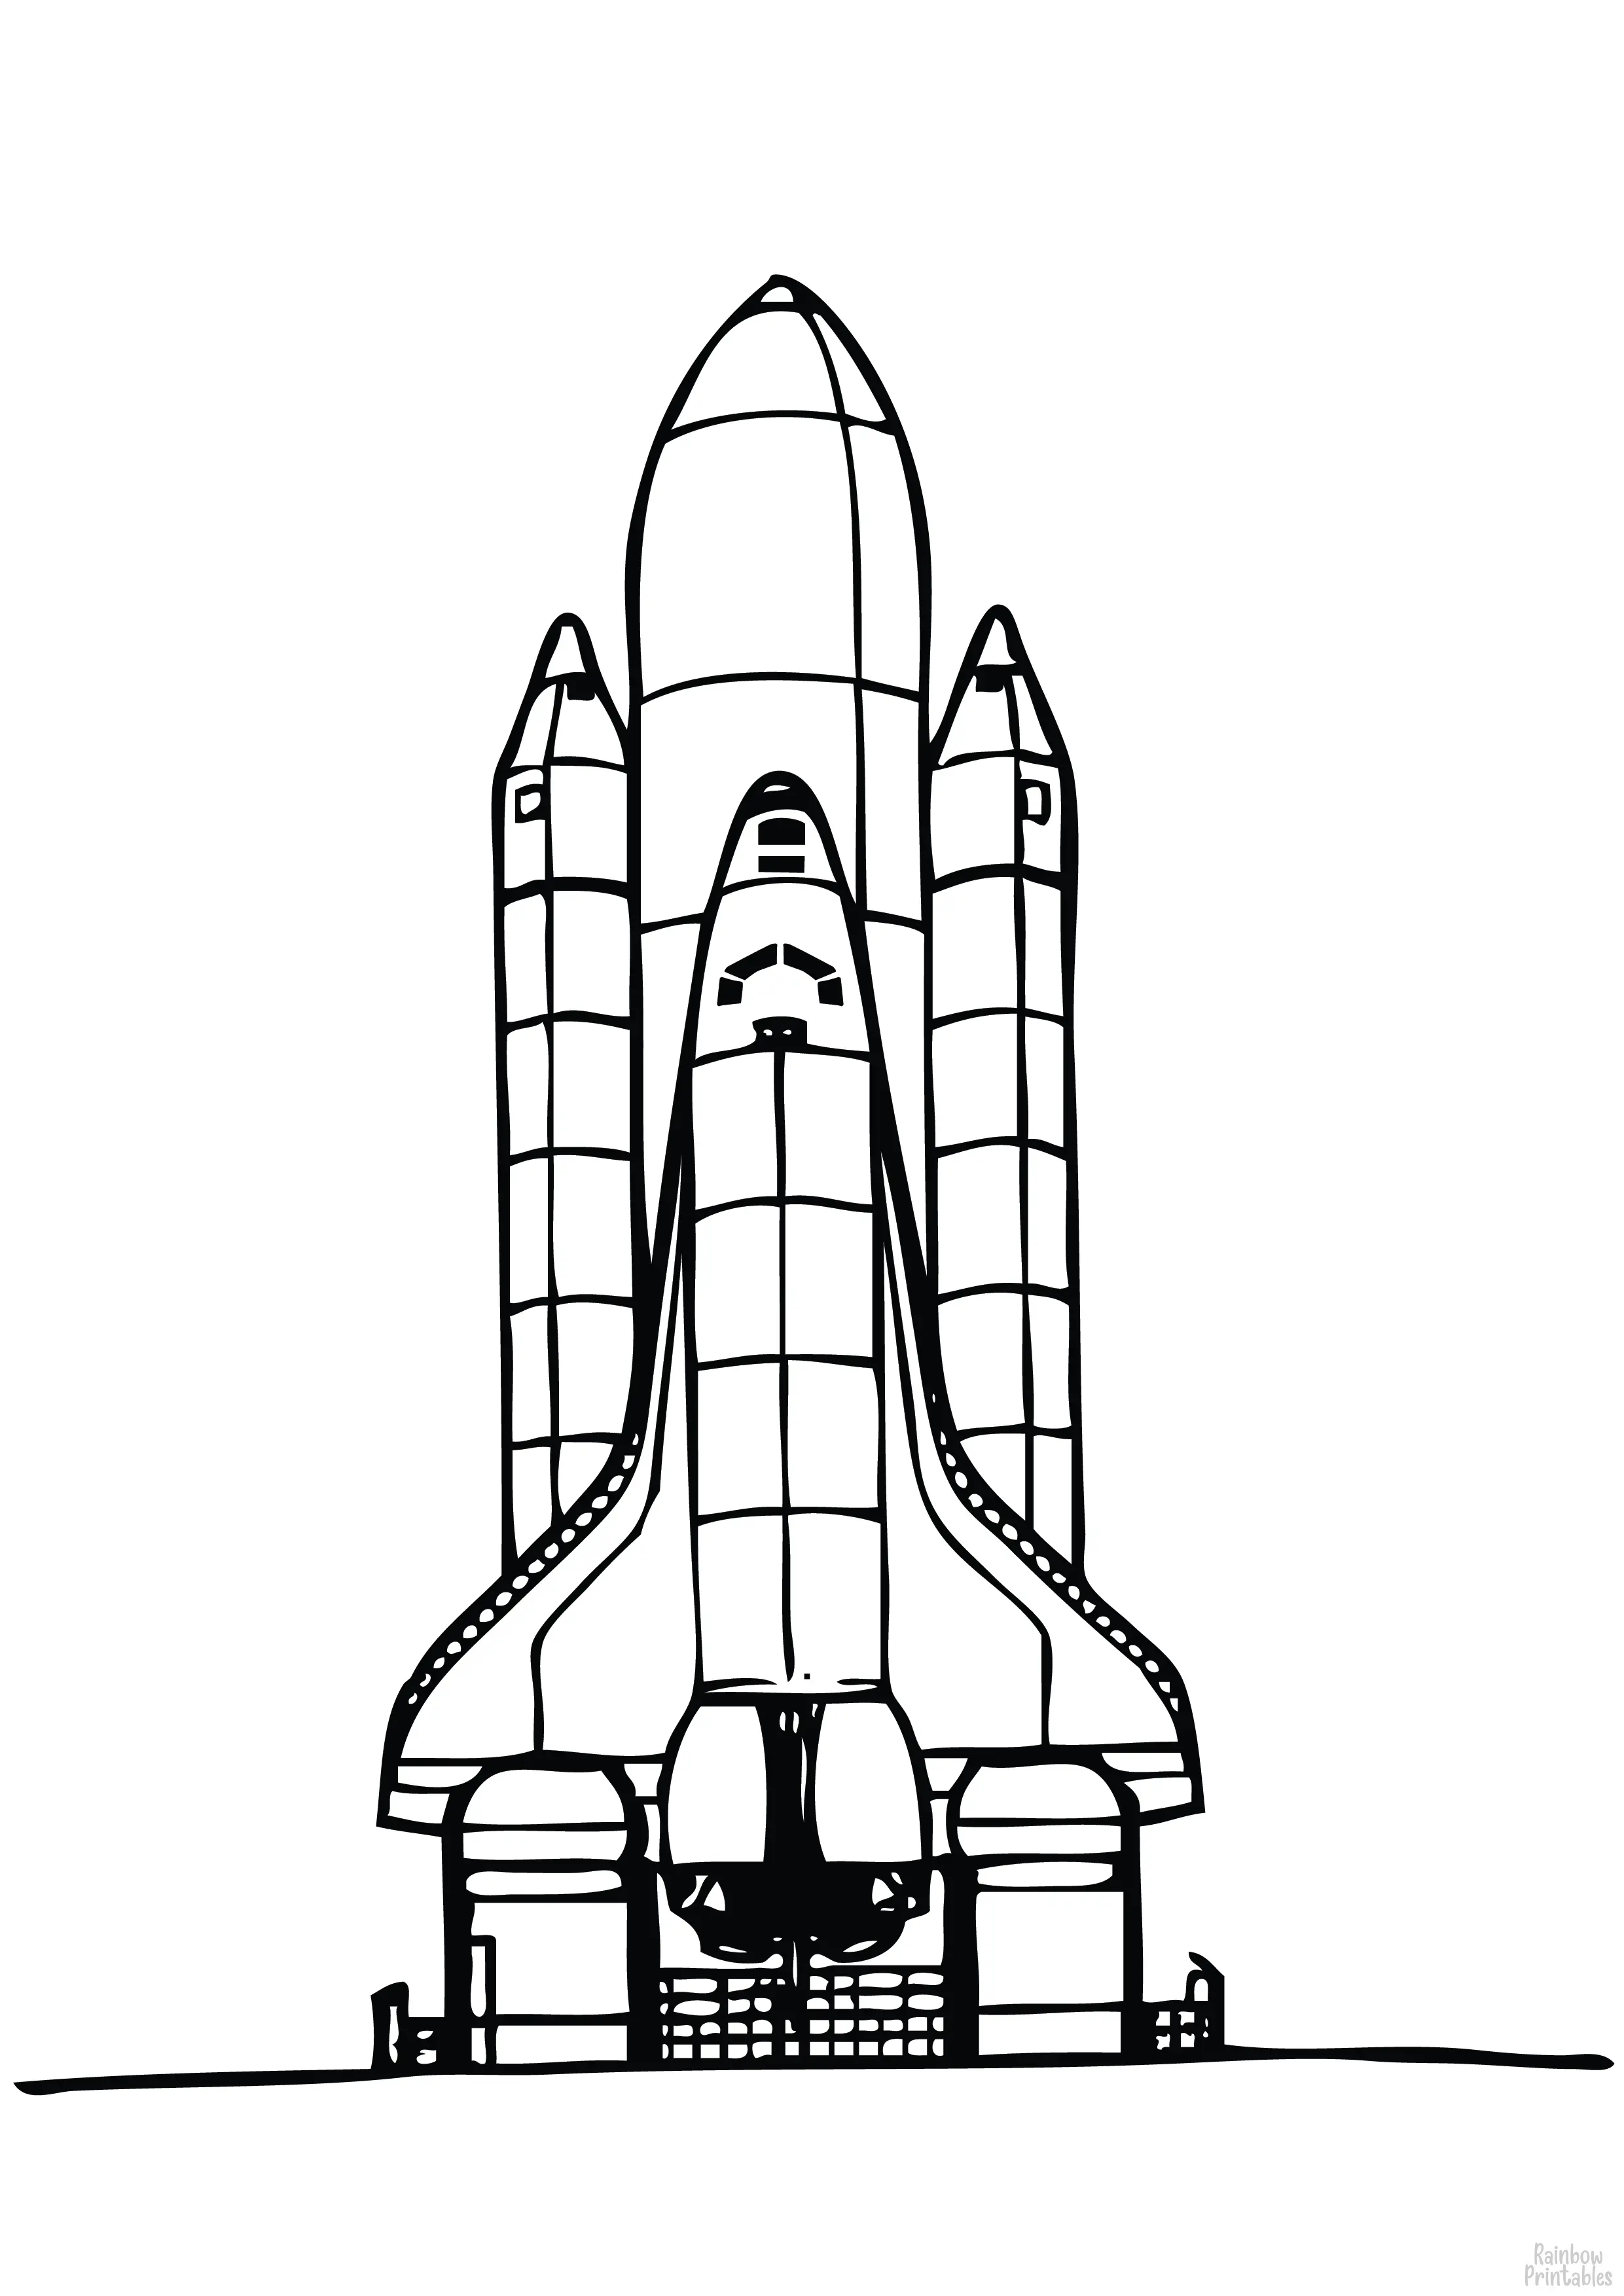 SPACE SHIP ROCKETSHIP Clipart Coloring Pages for Kids Adults Art Activities Line Art